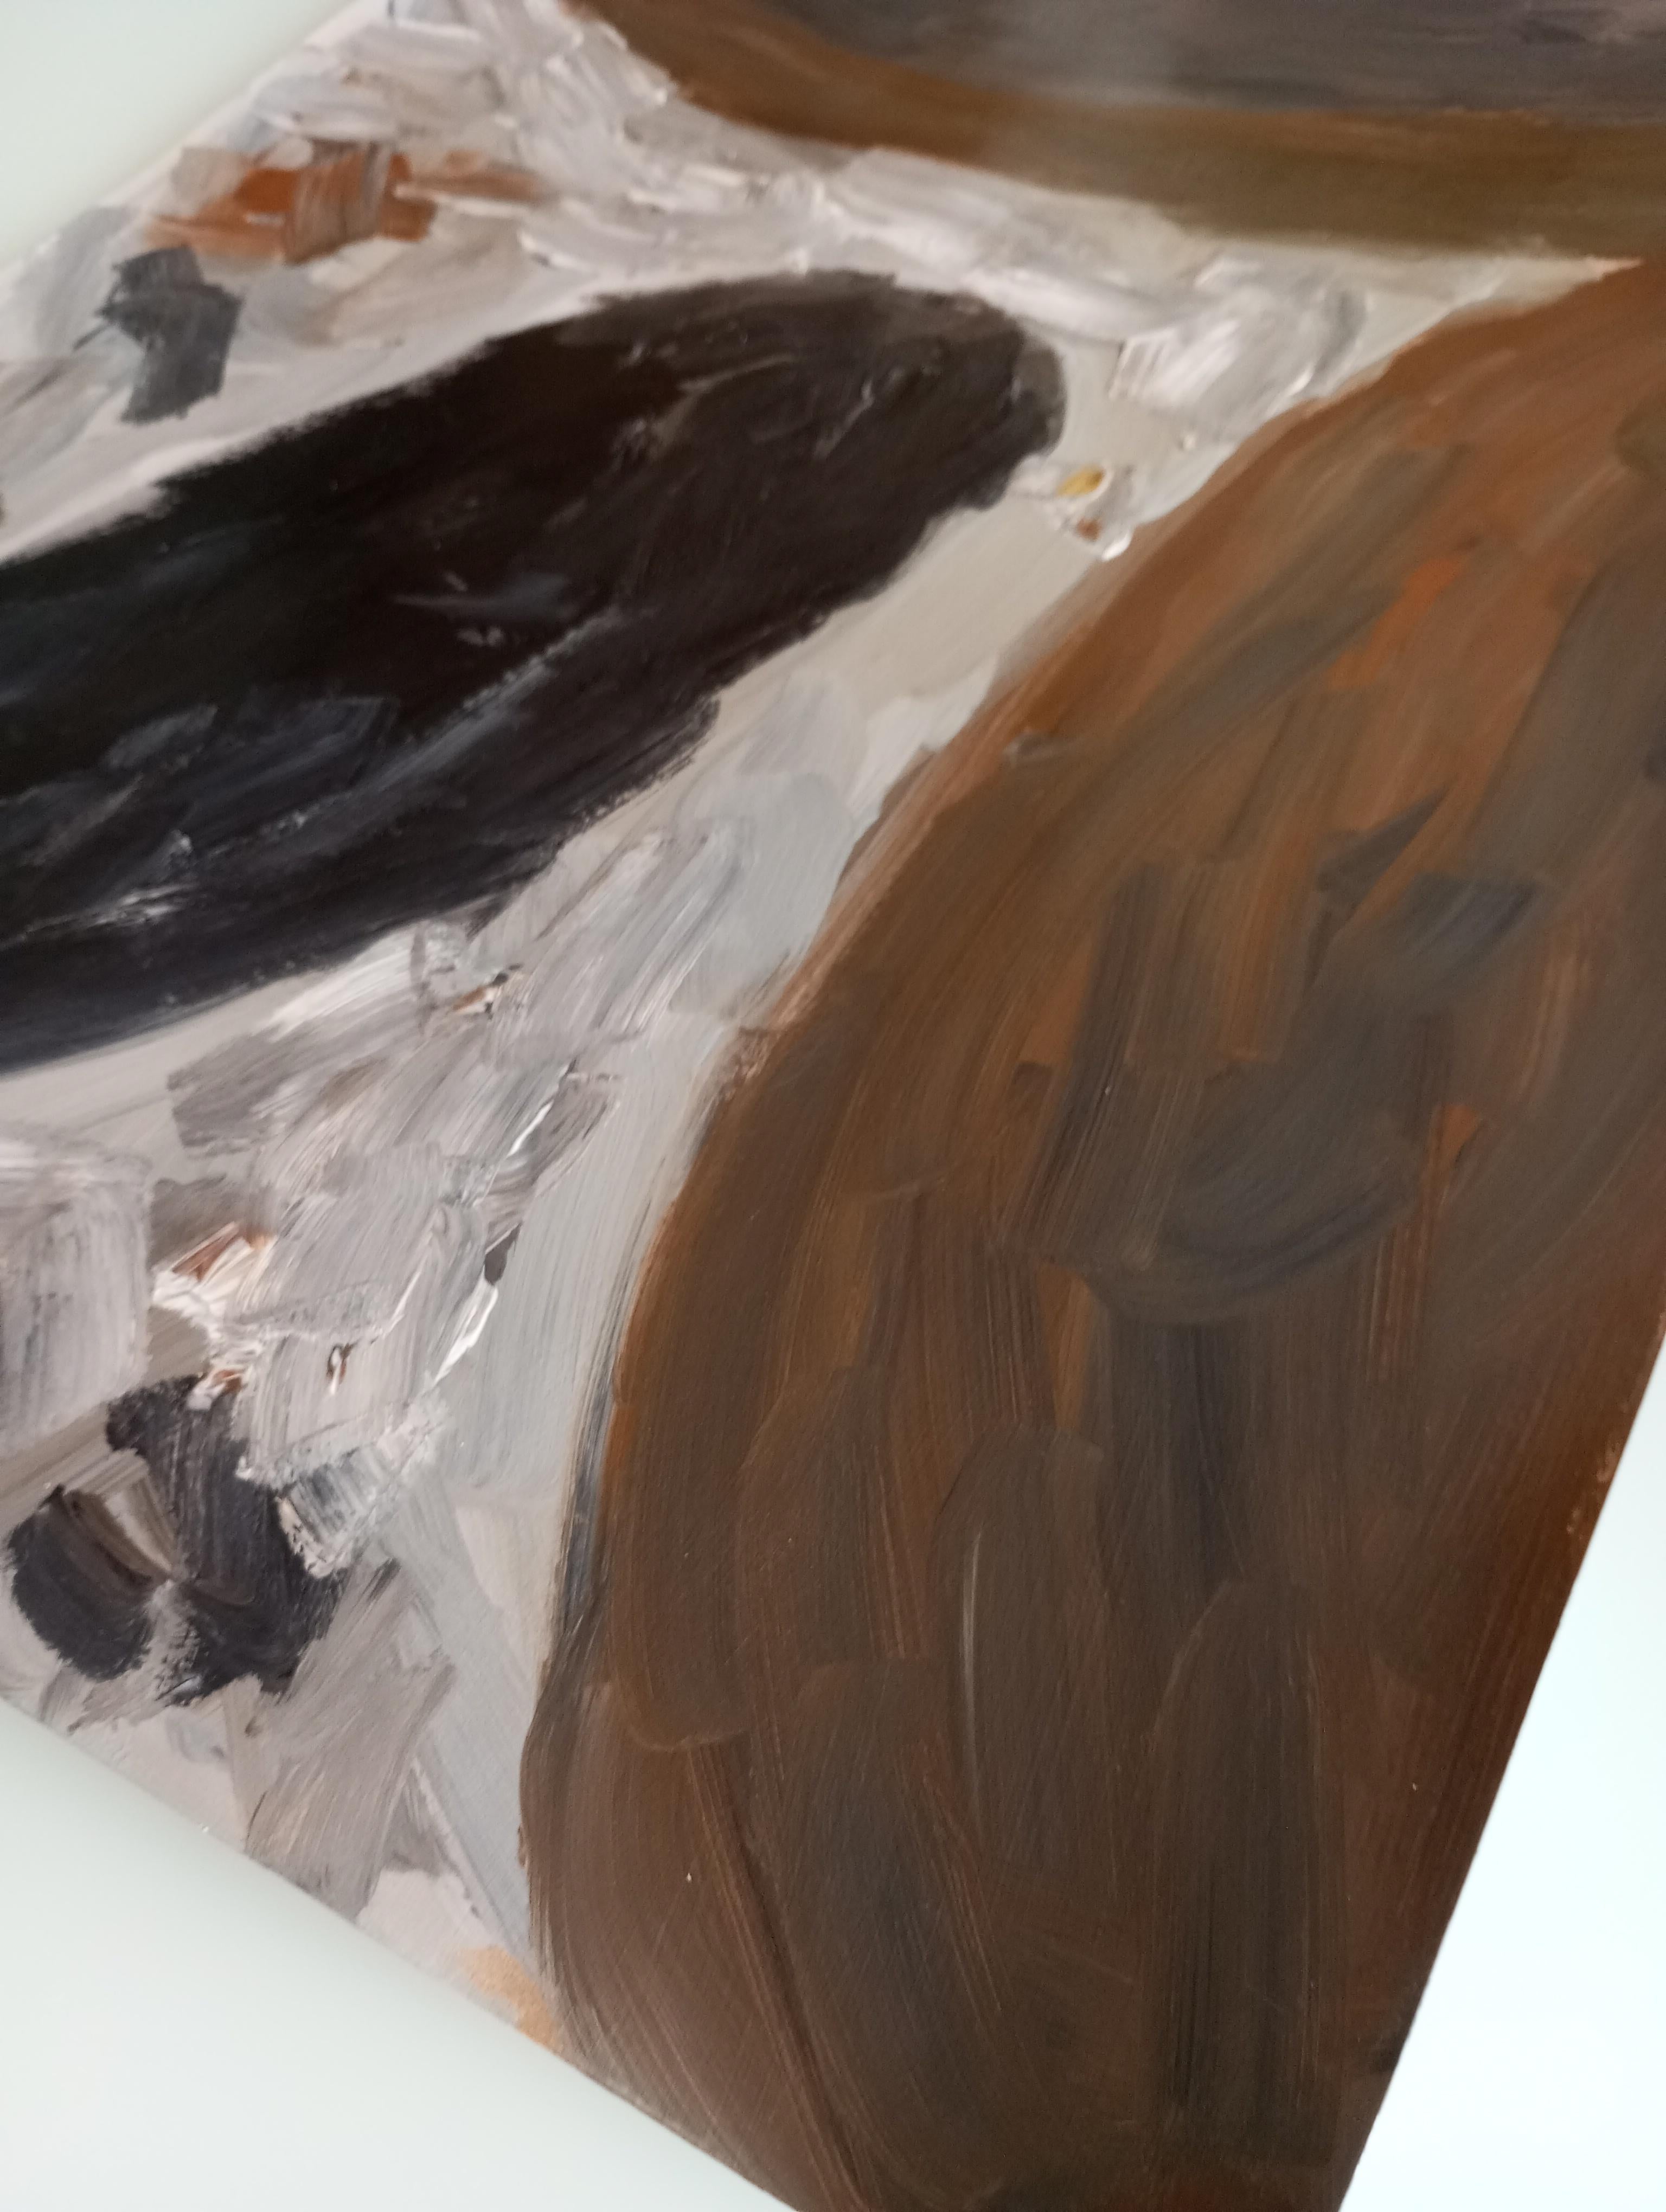 This artwork makes part of my small collection of abstract paintings created in various soft neutral earth tones. Main colors of this collection are grey, brown, suede, black, white. 

This collection was created for contemporary interior decoration